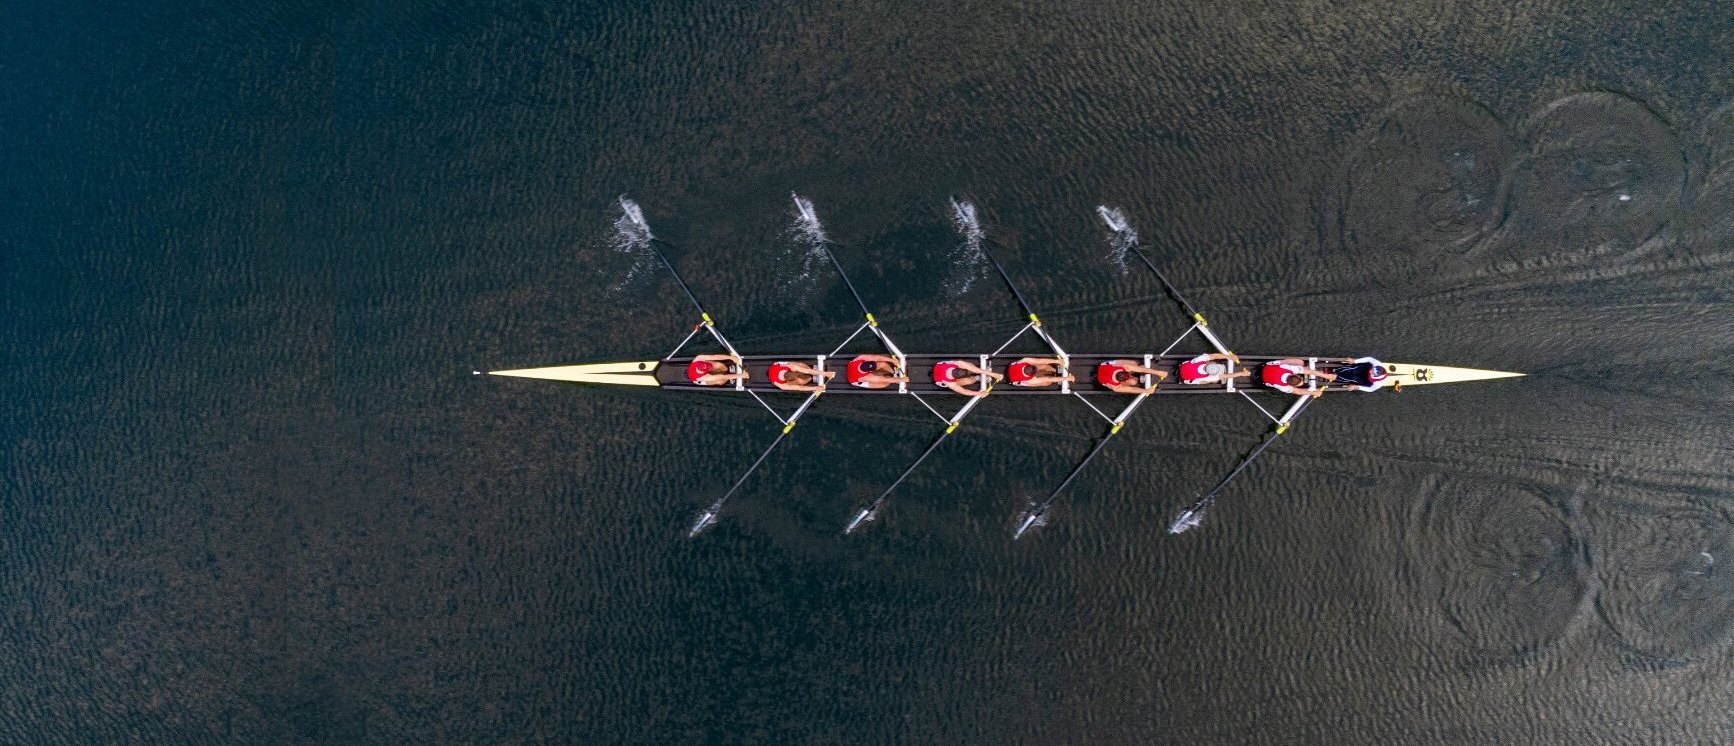 Rowers photographed in birdseye view